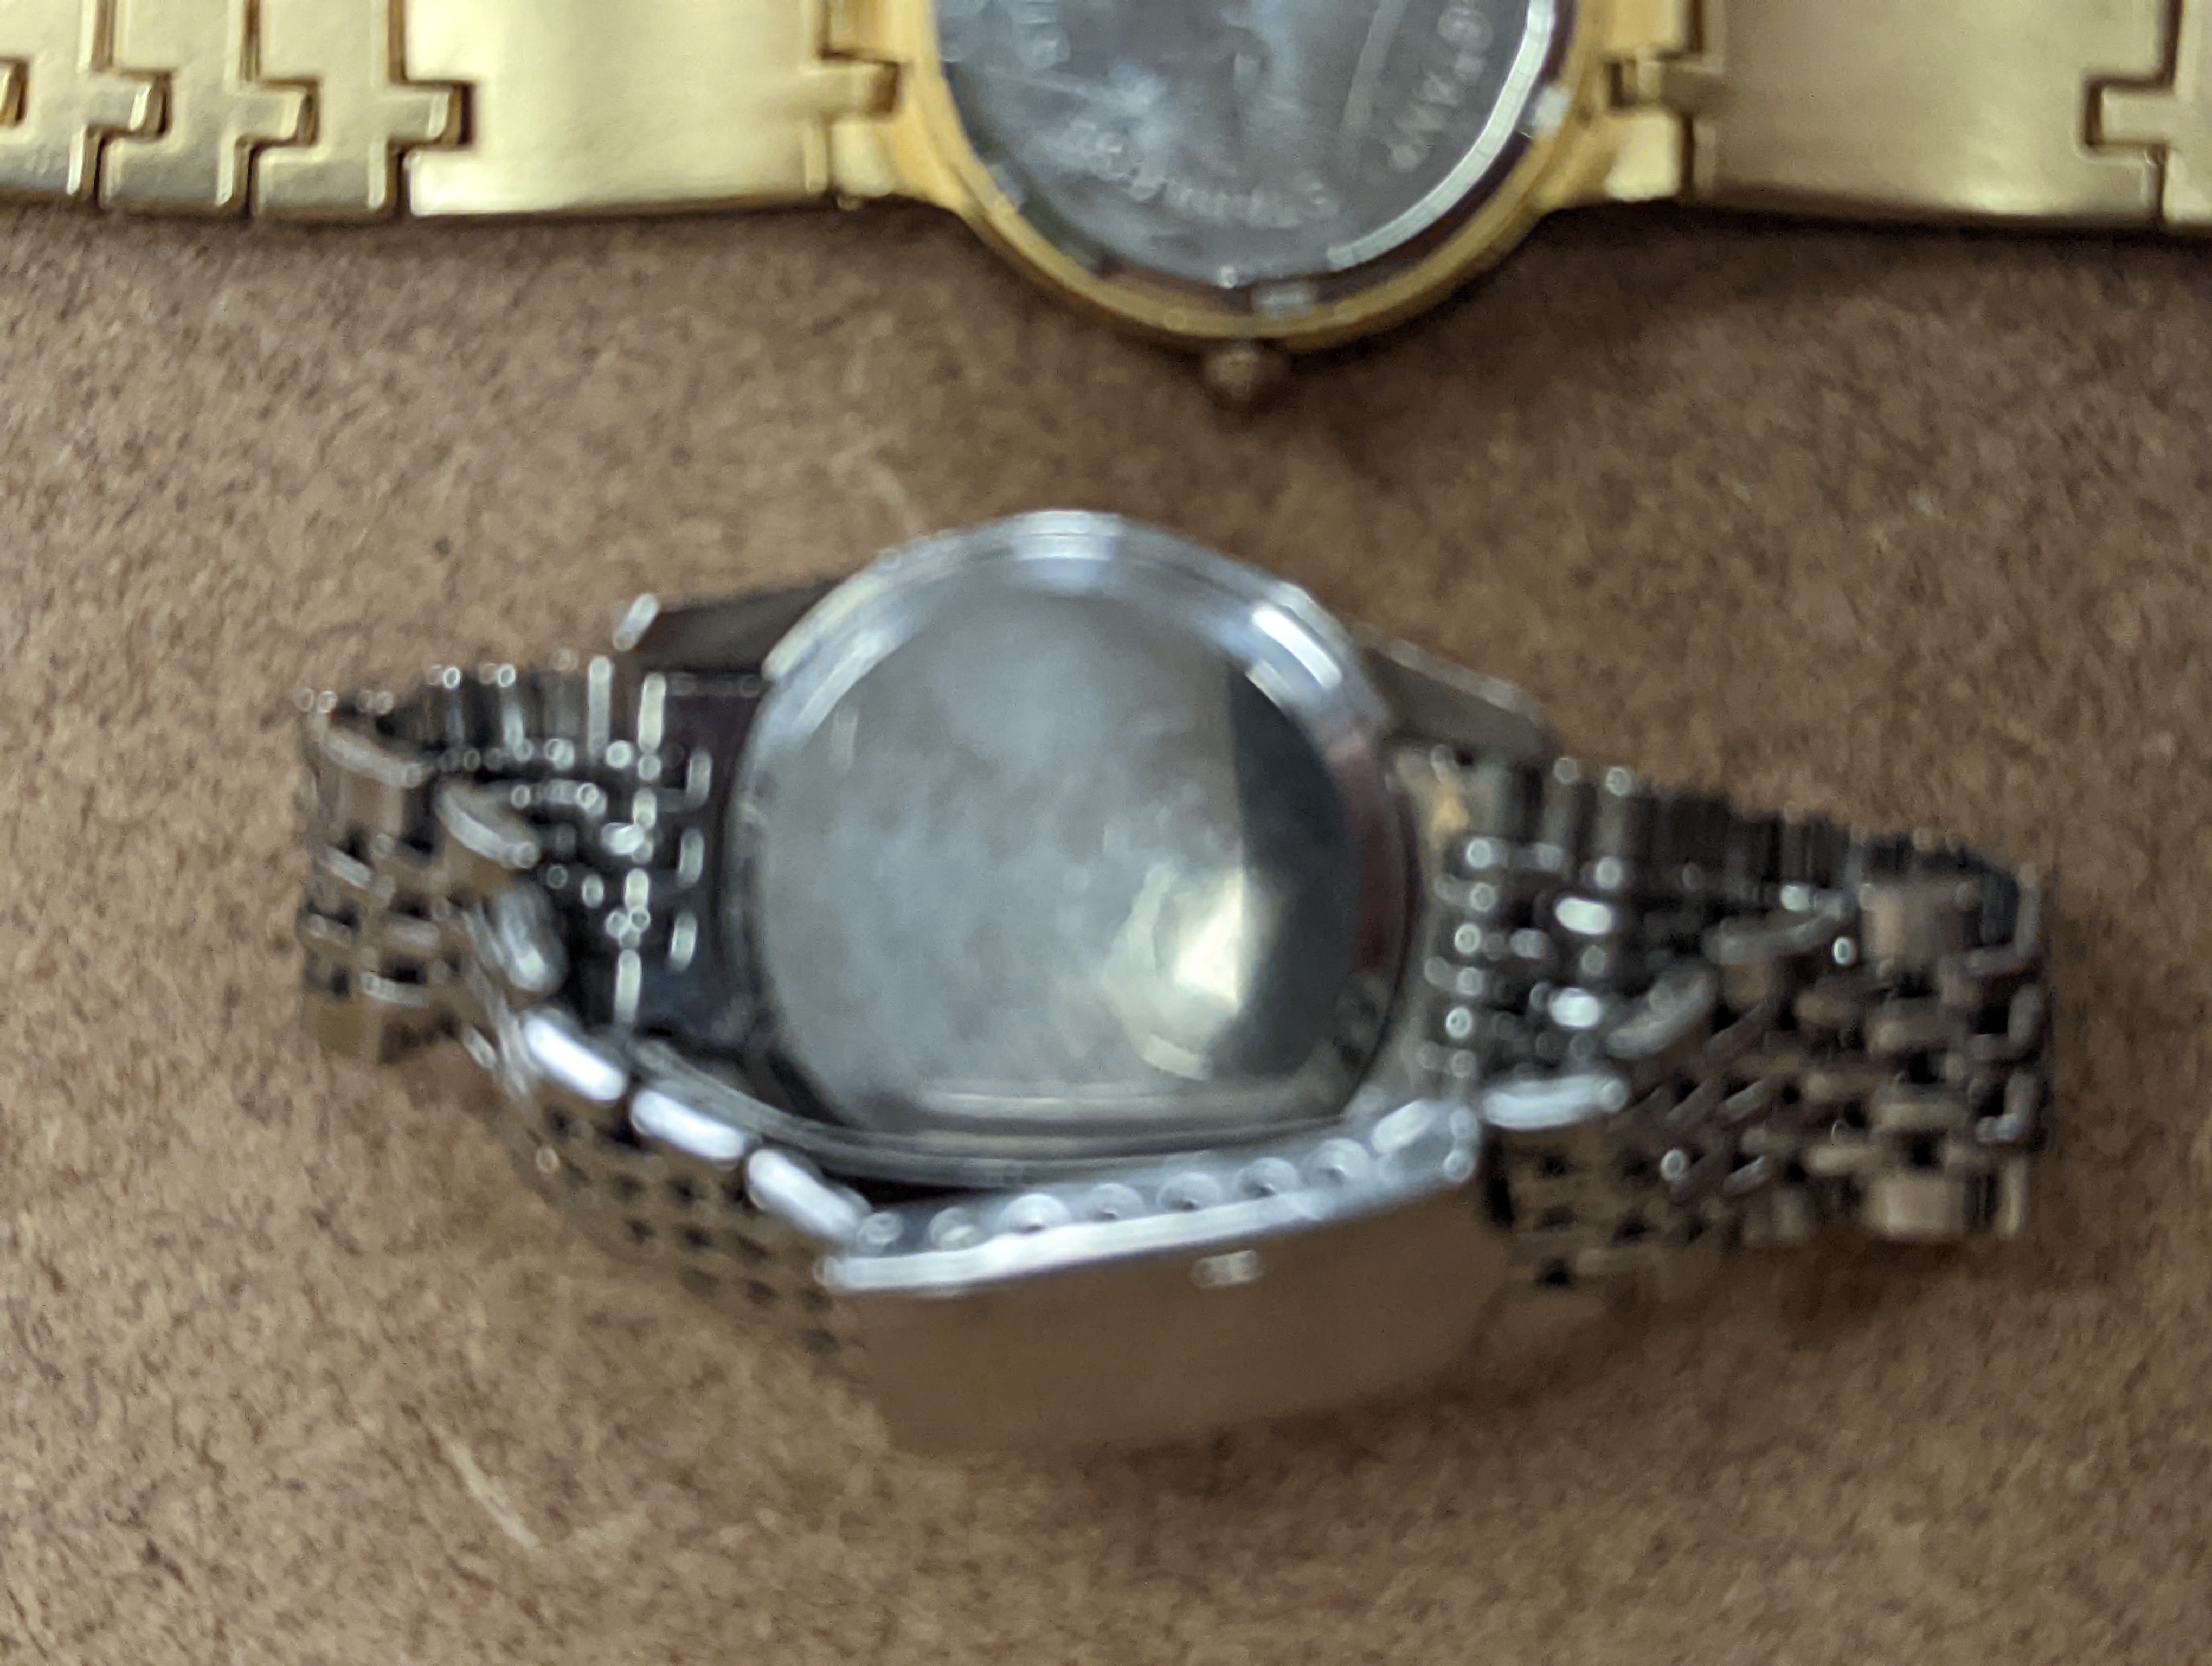 A gentleman's mid 20th century stainless steel Omega manual wrist watch, case diameter 35mm, on associated bracelet, together with eight other assorted wrist watches including Seiko and Silvan, an Oris pocket watch and t